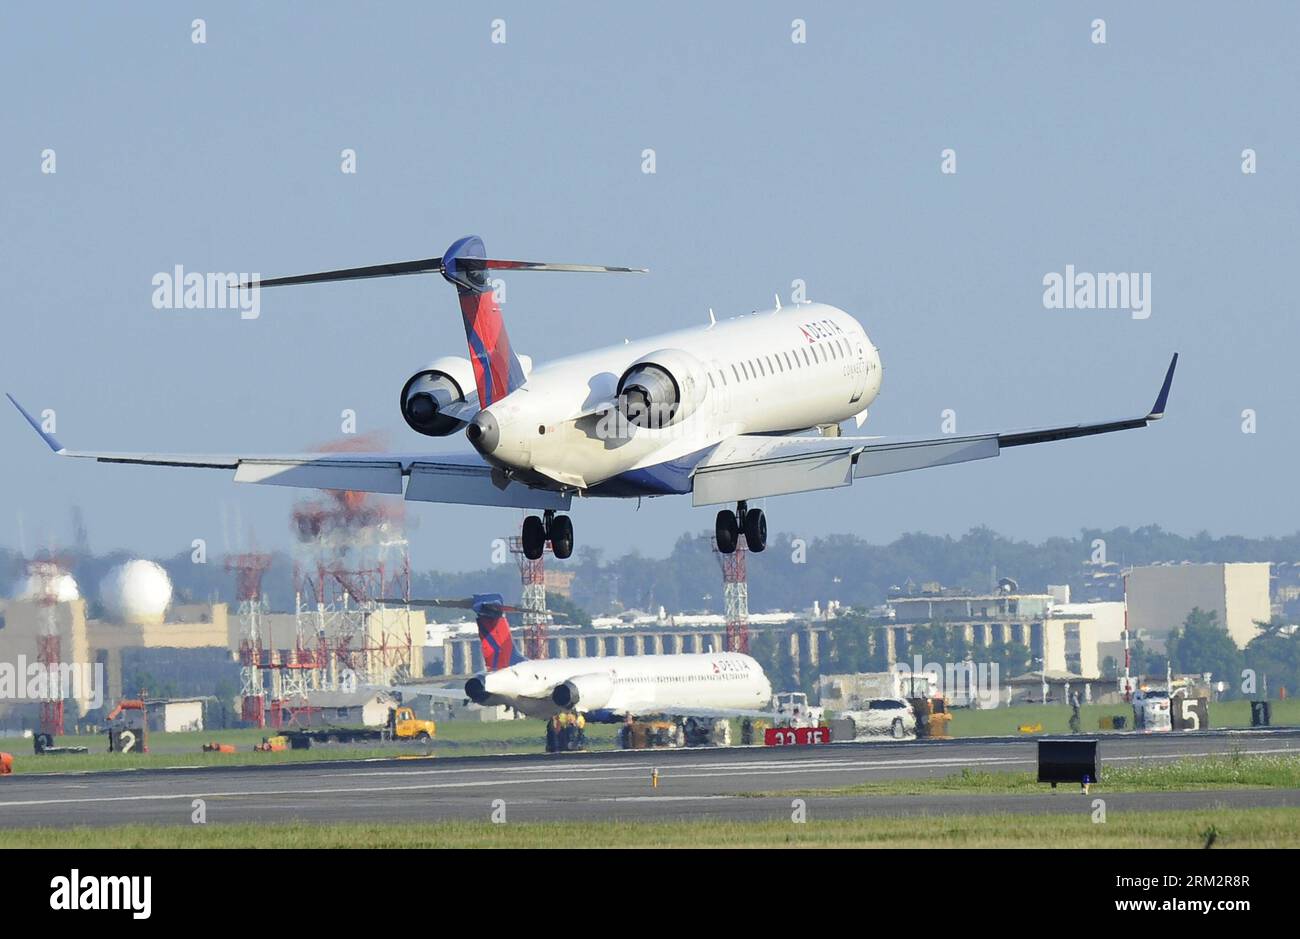 Bildnummer: 59898073  Datum: 24.06.2013  Copyright: imago/Xinhua WASHINGTON, June 24, 2013 - A plane of Delta airlines lands beside the company s another plane that veered off runway earlier at Ronald Reagan National Airport in Washington, capital of the United States, June 24, 2013. The Delta MD-90 passenger jet on Monday veered off runway while taking off at the airport and got stuck in mud. No casualties were reported. (Xinhua/Fang Zhe) (axy) U.S.-WASHINGTON-DELTA PLANE-ACCIDENT PUBLICATIONxNOTxINxCHN Wirtschaft Flugzeug Unfall x0x xsk 2013 quer     59898073 Date 24 06 2013 Copyright Imago Stock Photo